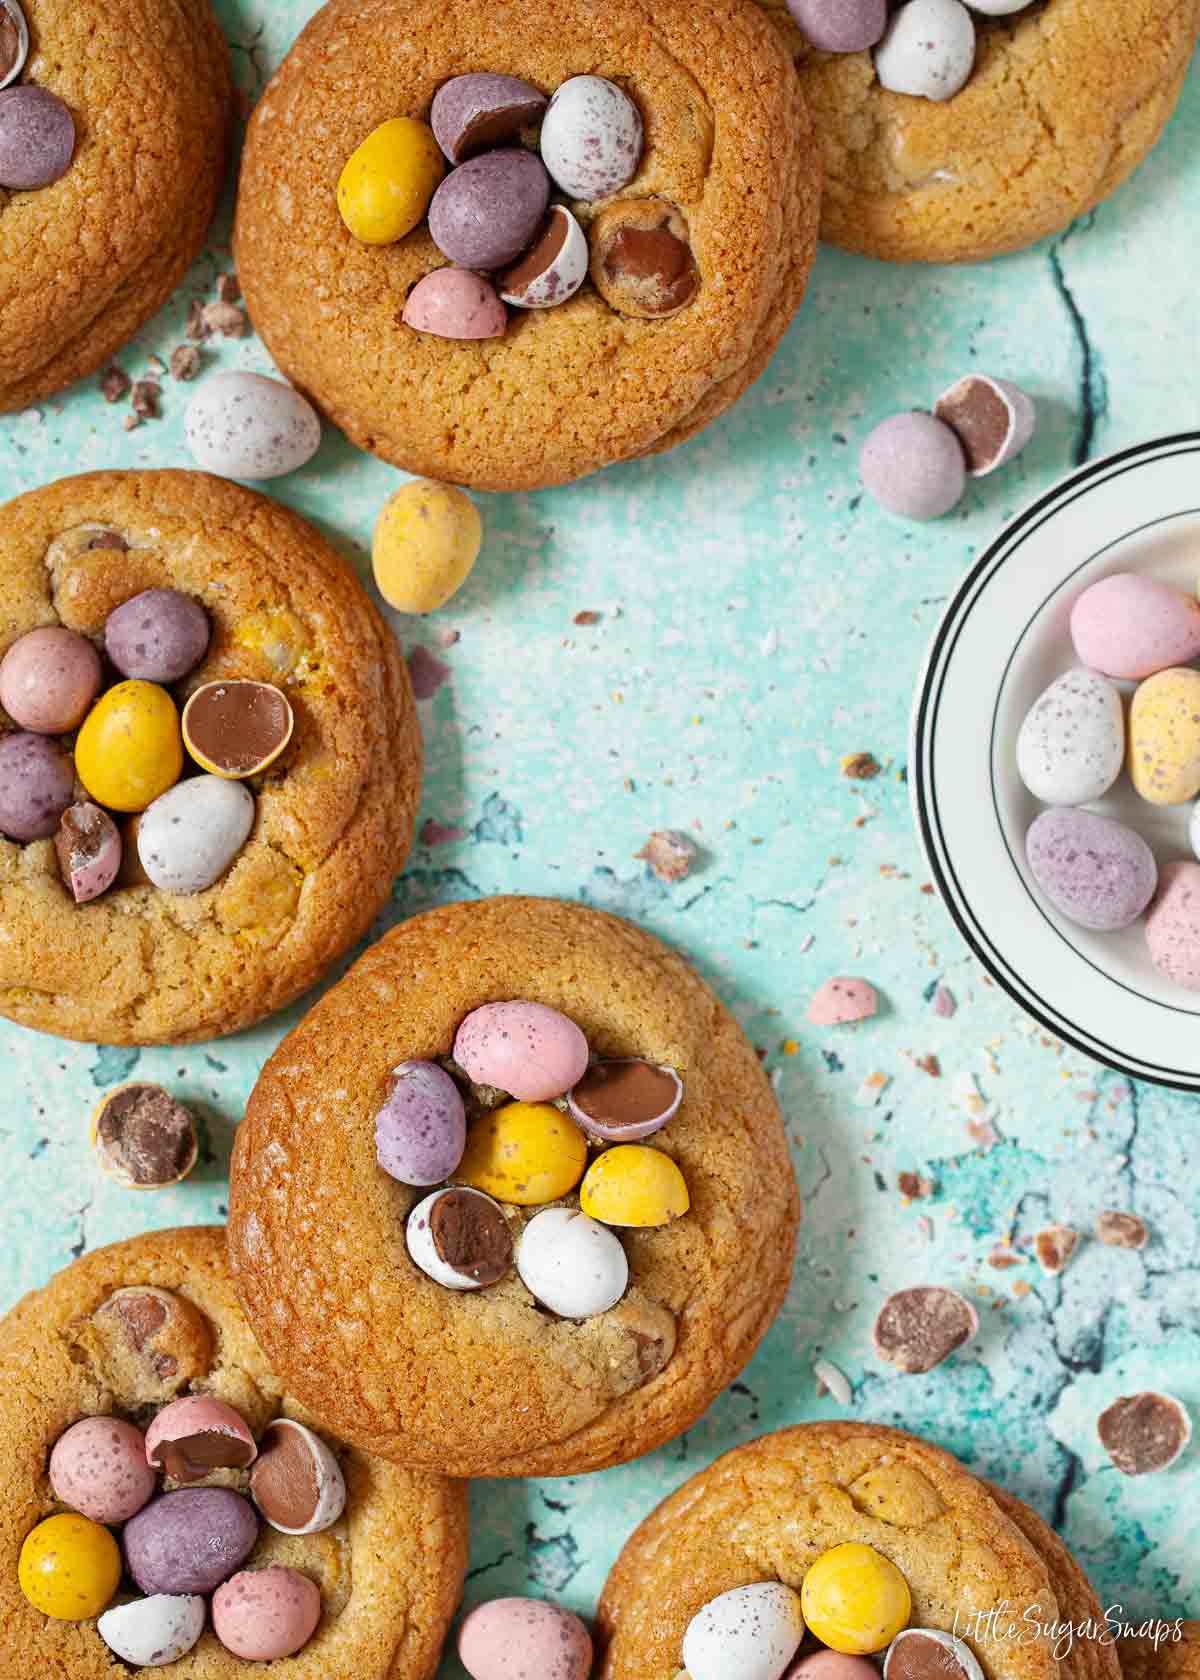 Cookies topped with Mini Eggs and a bowl of Mini Eggs alongside.